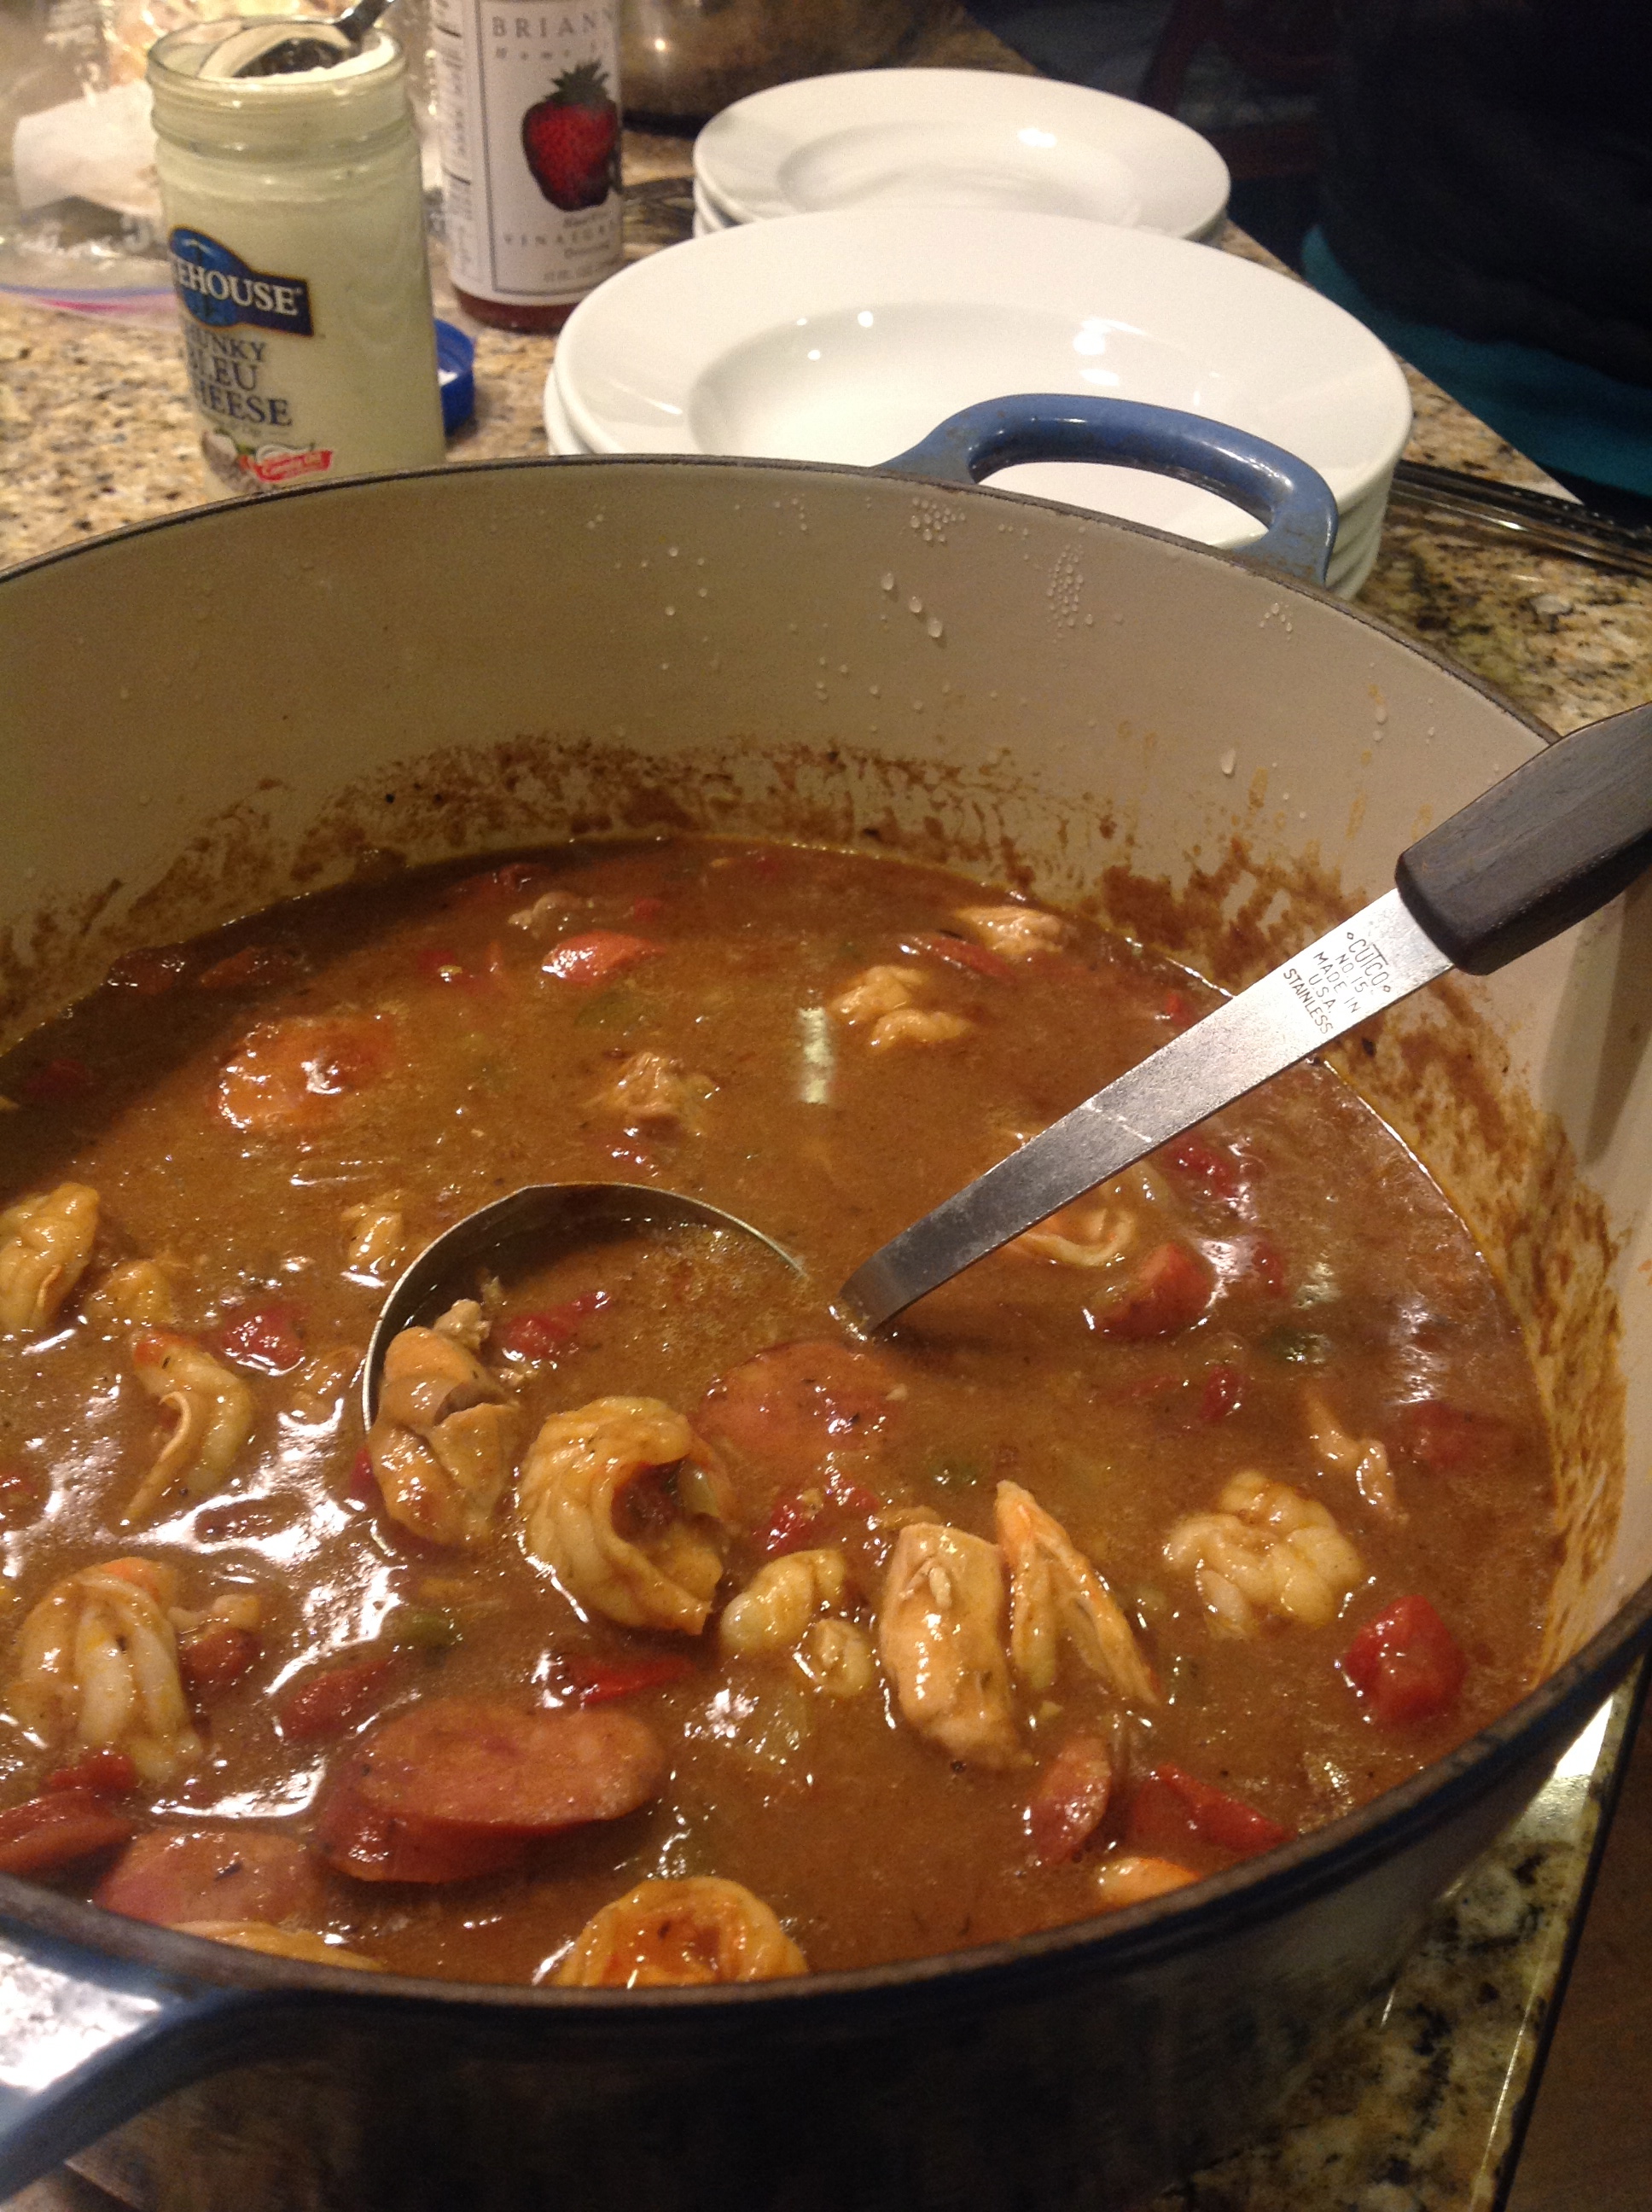 We had sunday dinner at my Inlaws last week, my DIL made gumbo (it was so good)